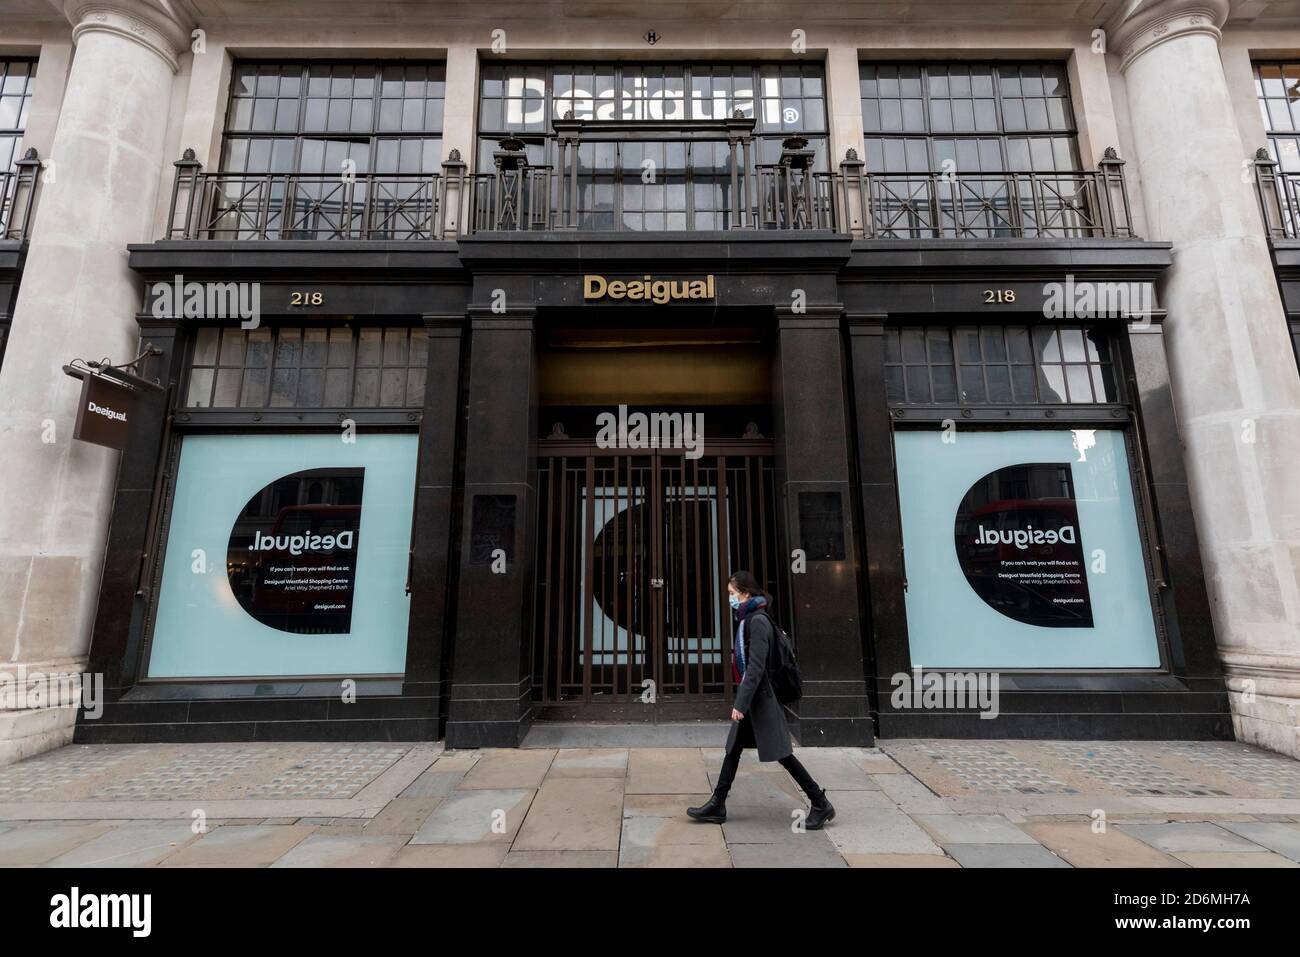 London, UK. 18 October 2020. The Desigual retail property stands on Street. The coronavirus pandemic has had a negative impact on footfall resulting in several retail owners to permanently